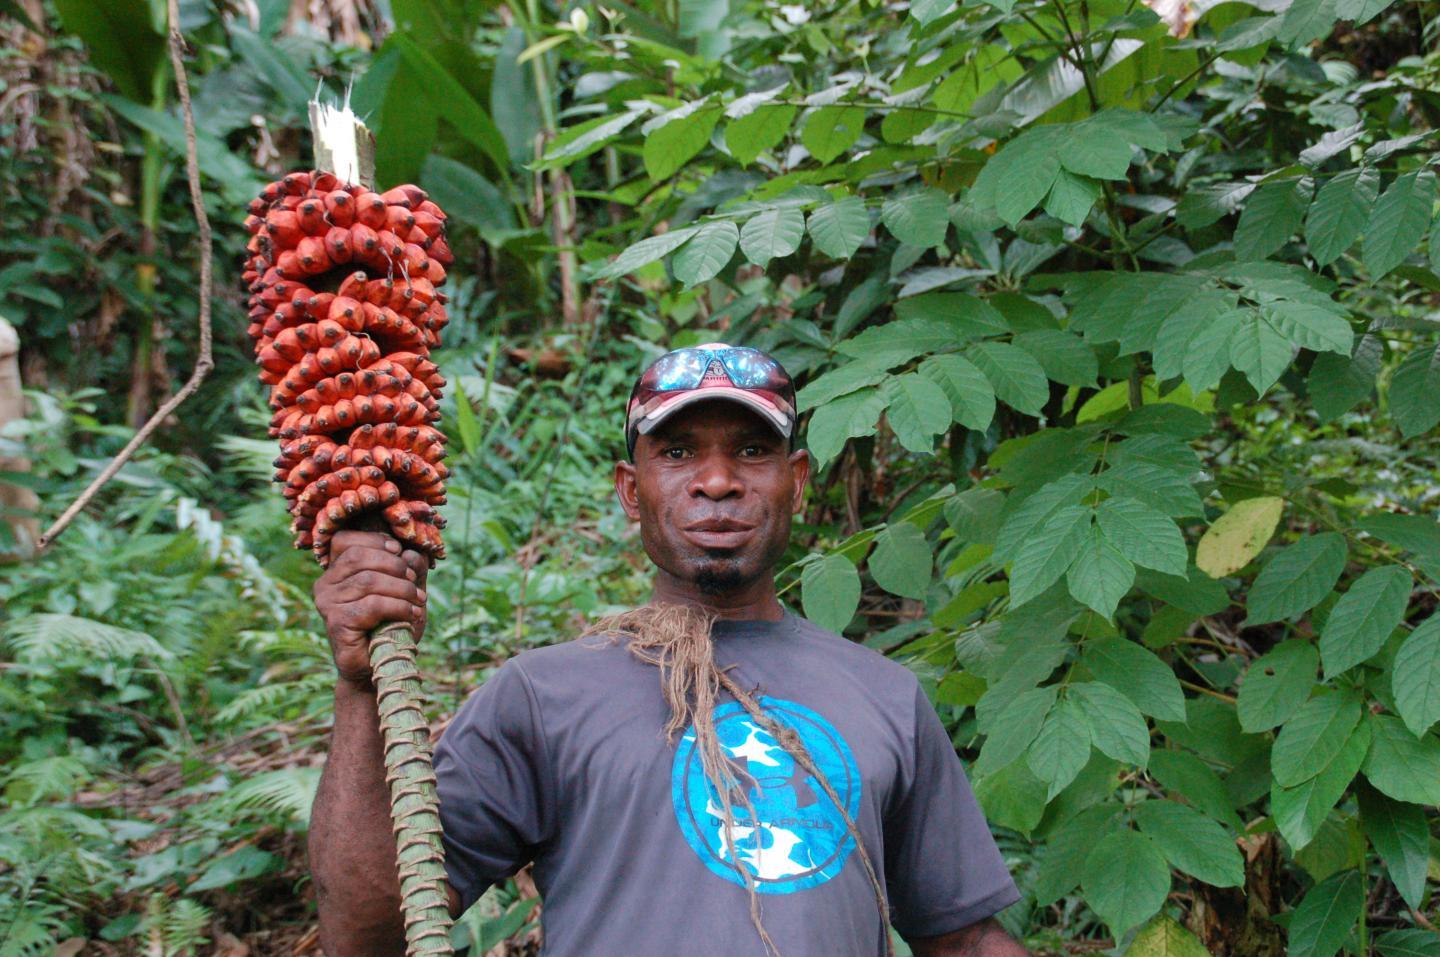 Man holding a bunch of red bananas